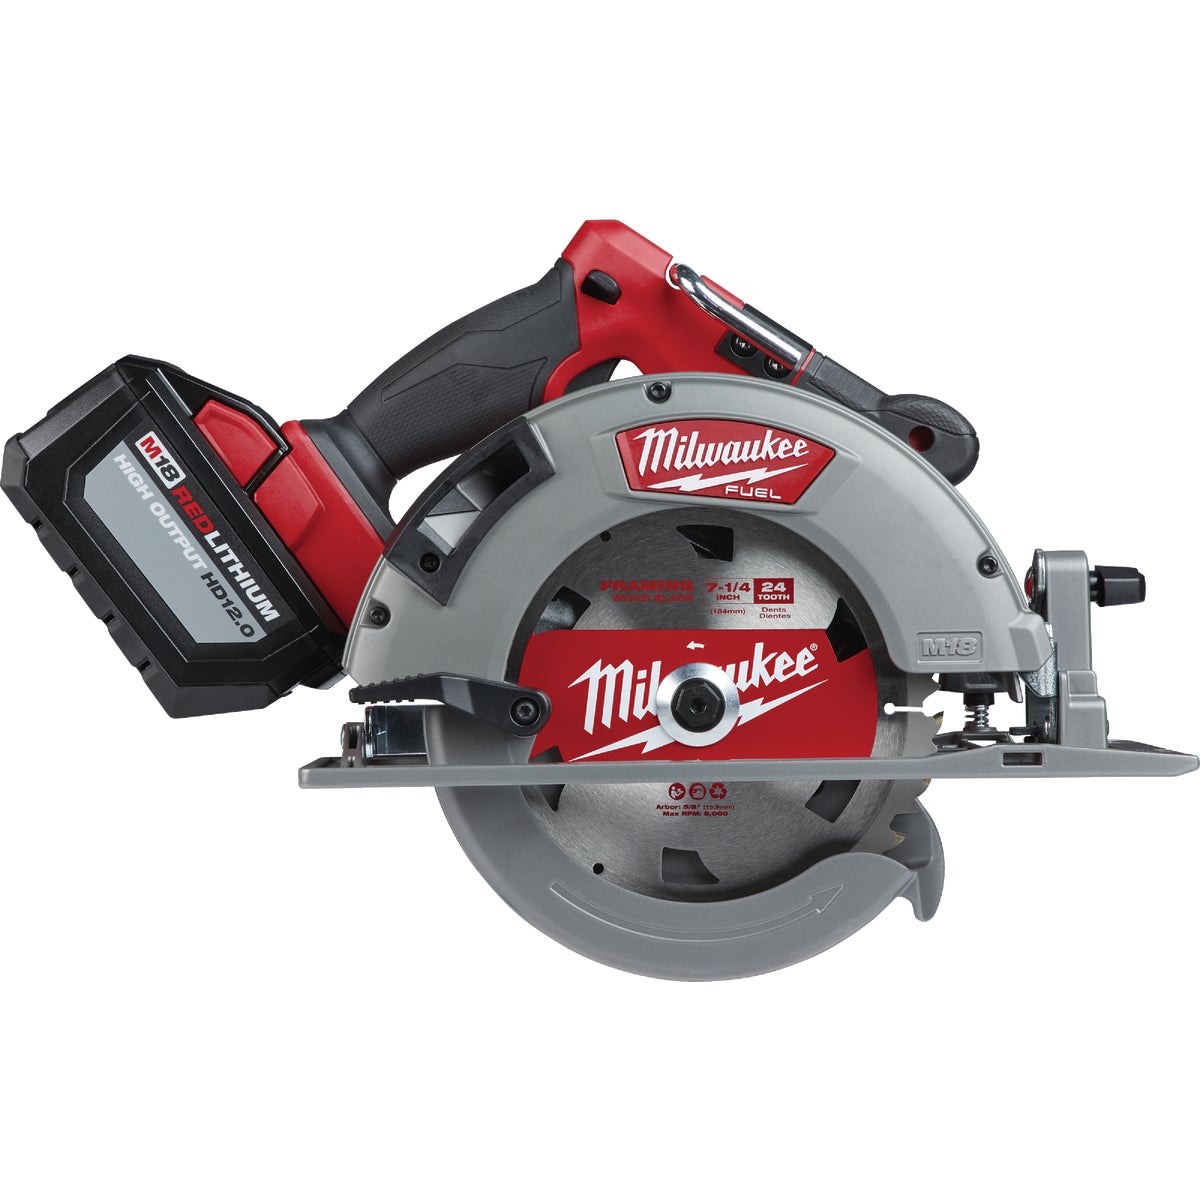 Item 304038, Designed for the carpenter, remodeler and general contractor, the M18 FUEL 